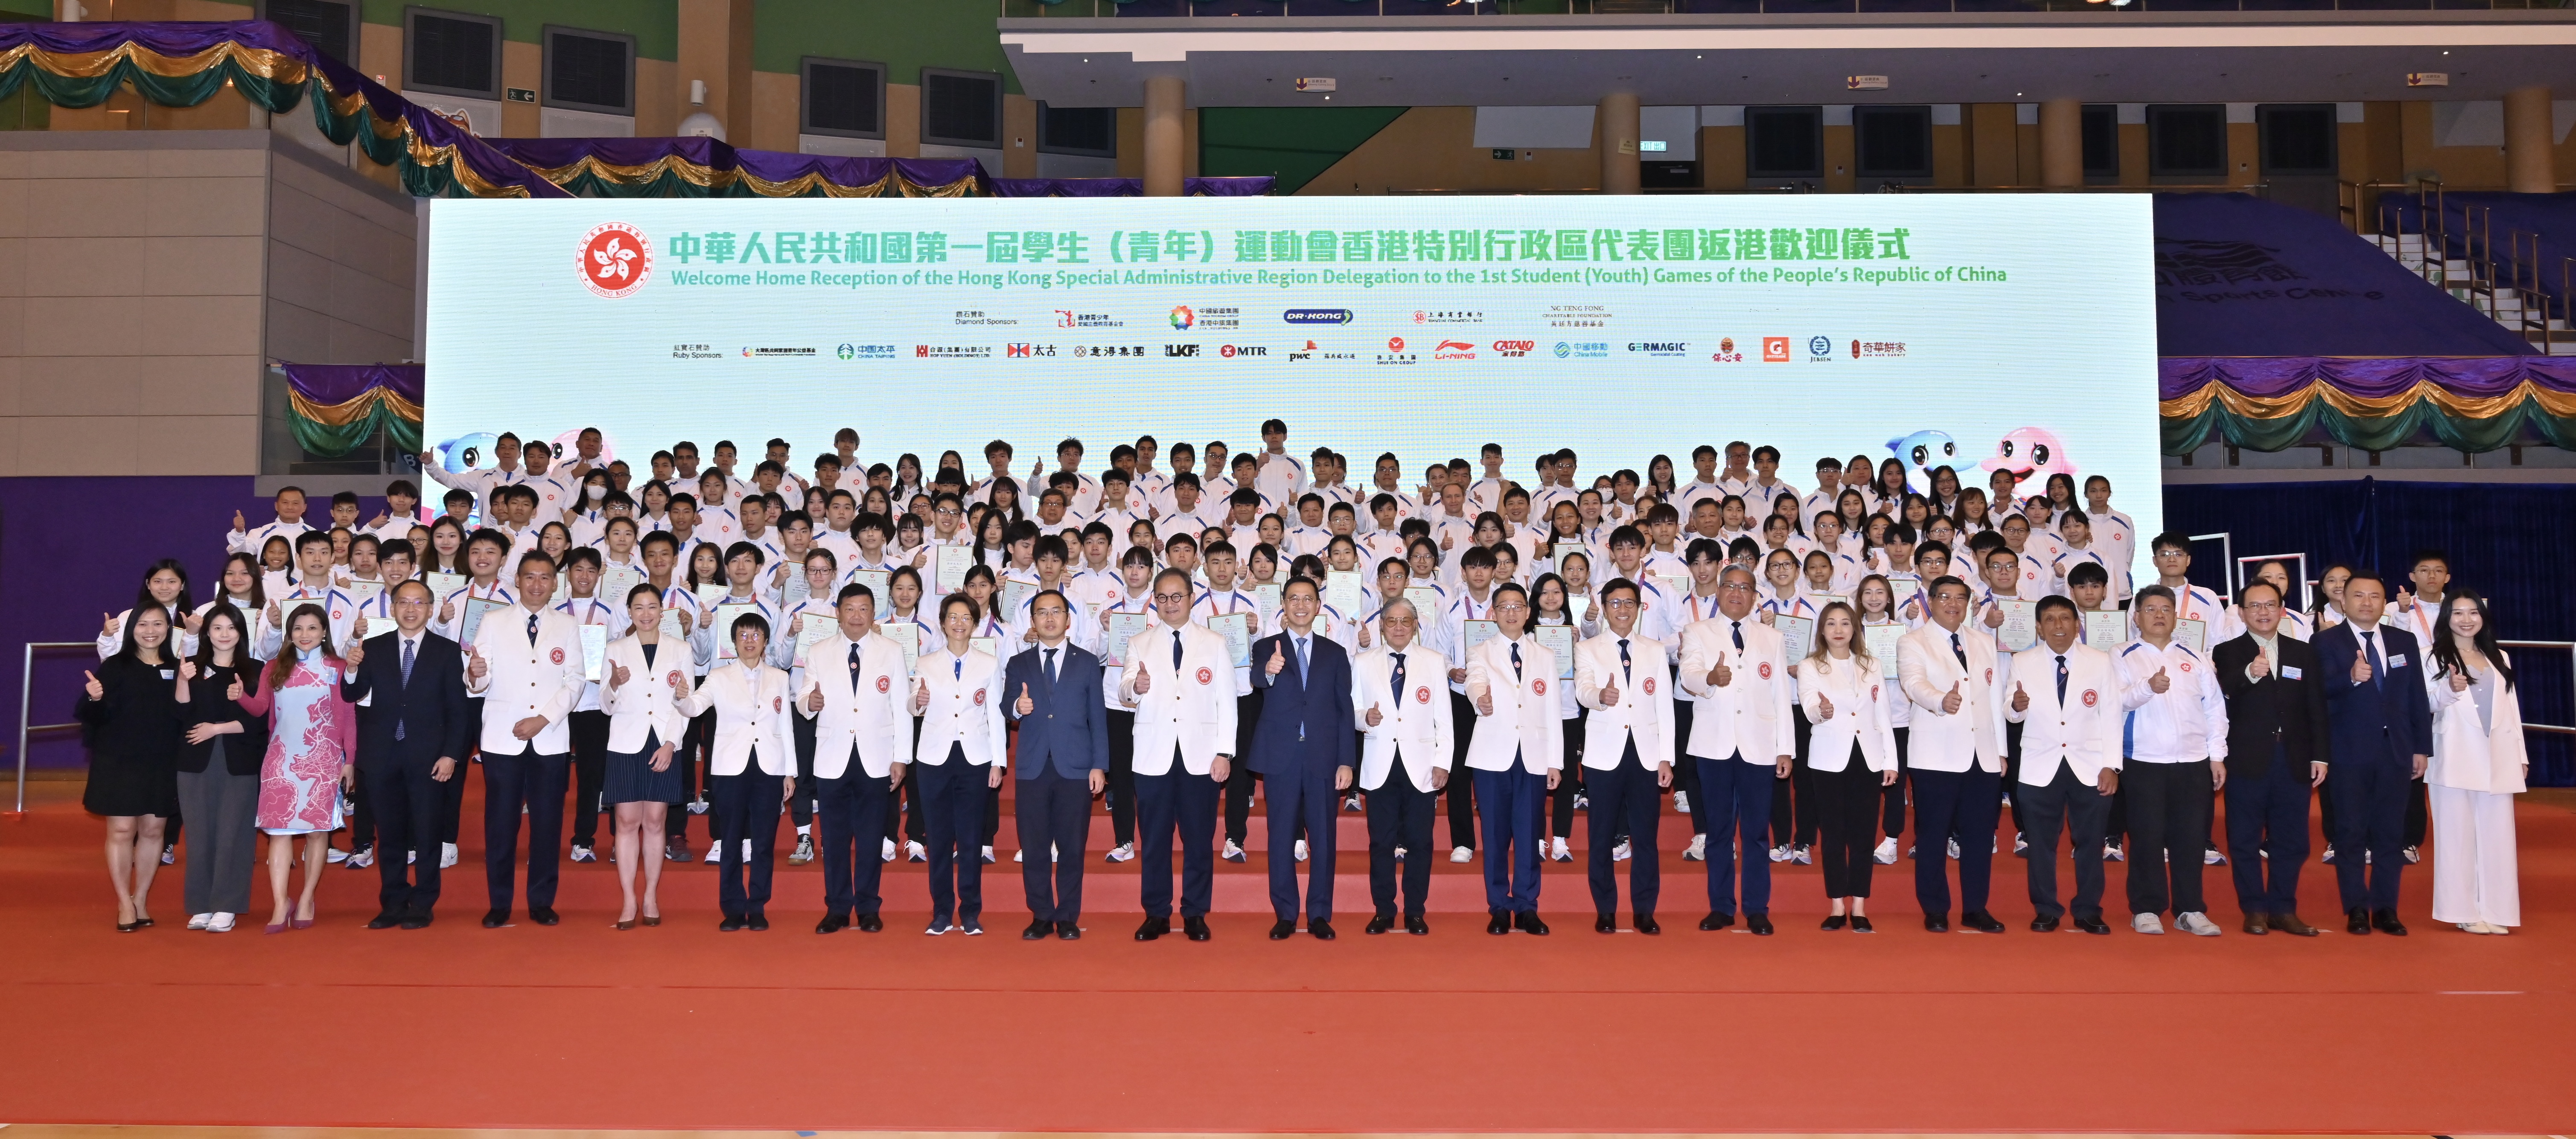 Group photo of members of the HKSAR Delegation to the 1st NSYG, athletes and guests at the Welcome Home Ceremony.